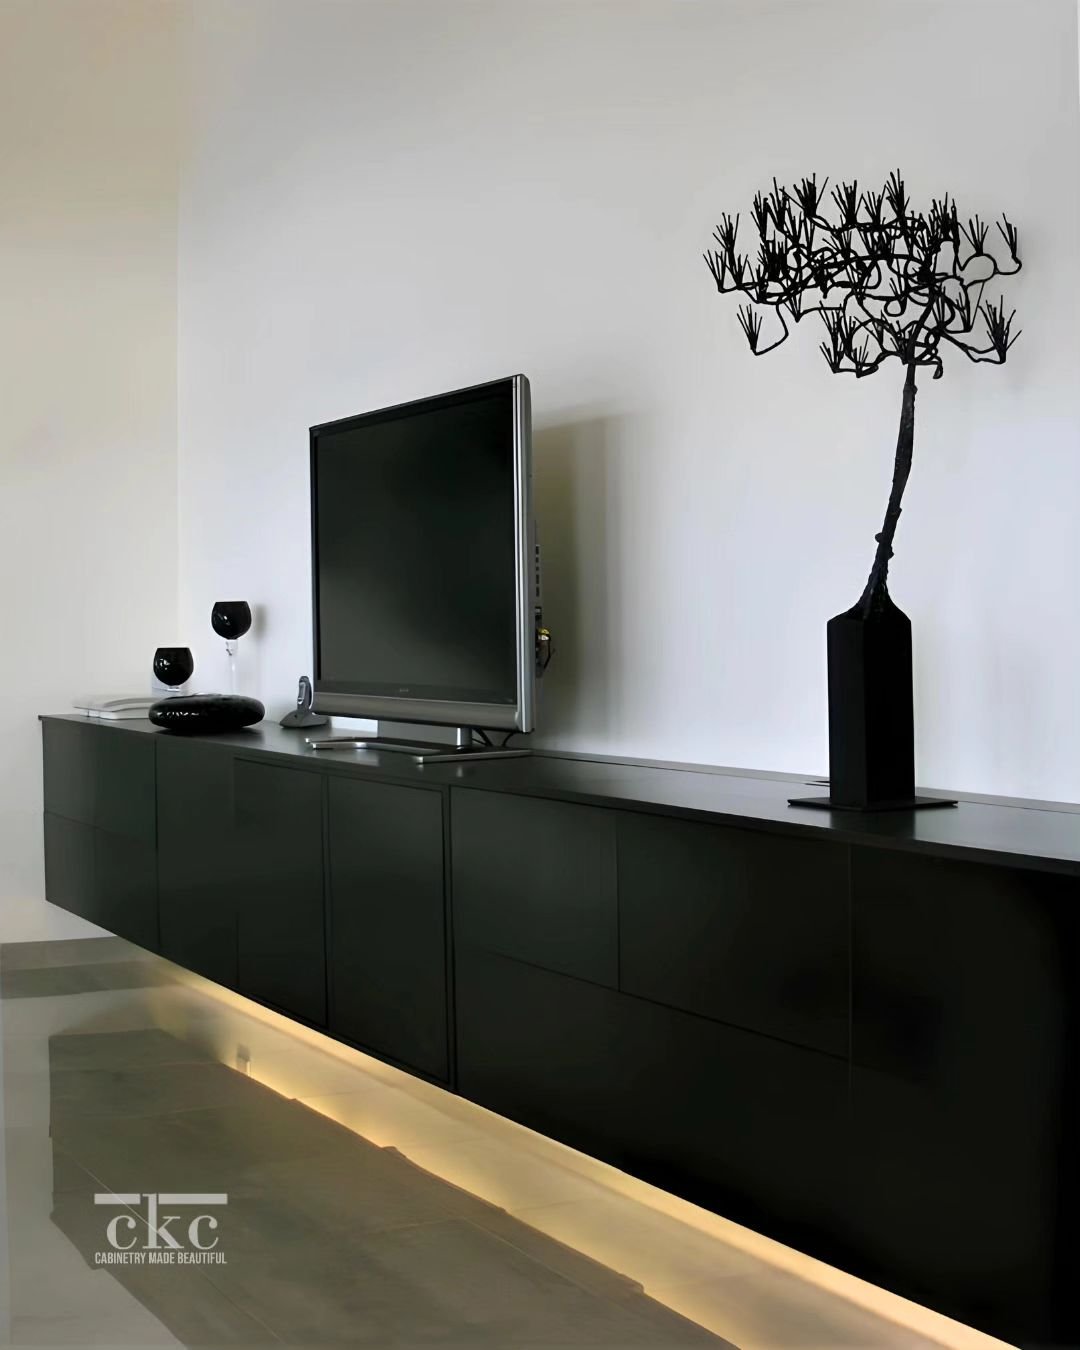 Craving a modern living room refresh? 

This floating TV stand is the answer! Its clean lines and black finish create a sleek aesthetic, while the space-saving design opens up your living room. Perfect for small or cozy spaces, this stand is the miss